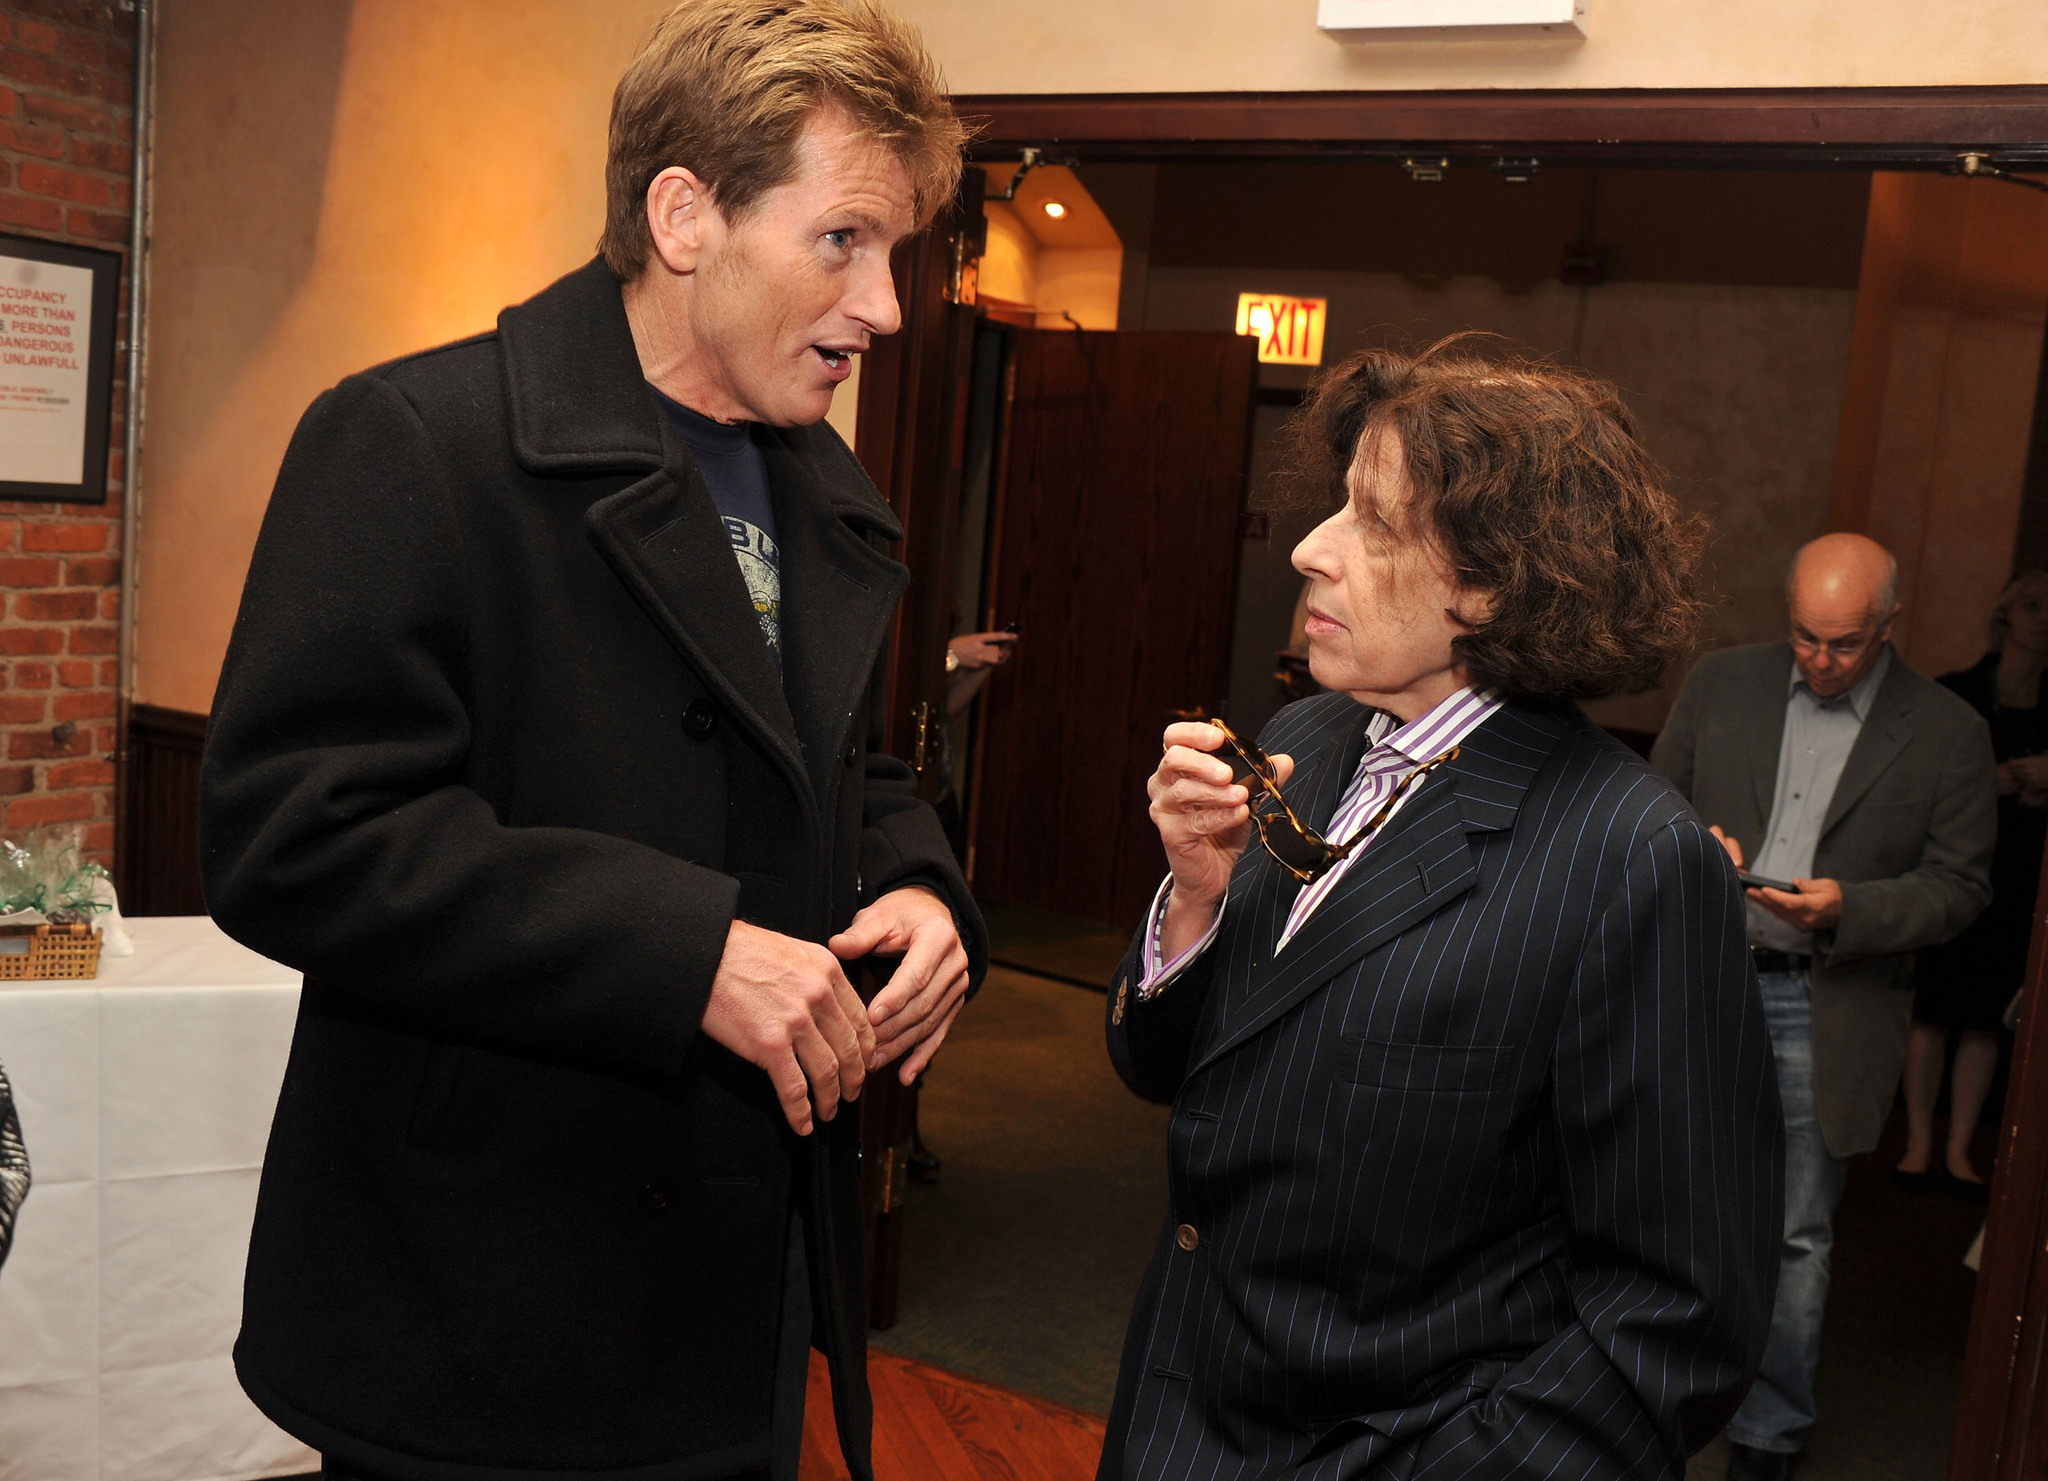 Denis Leary and Fran Lebowitz